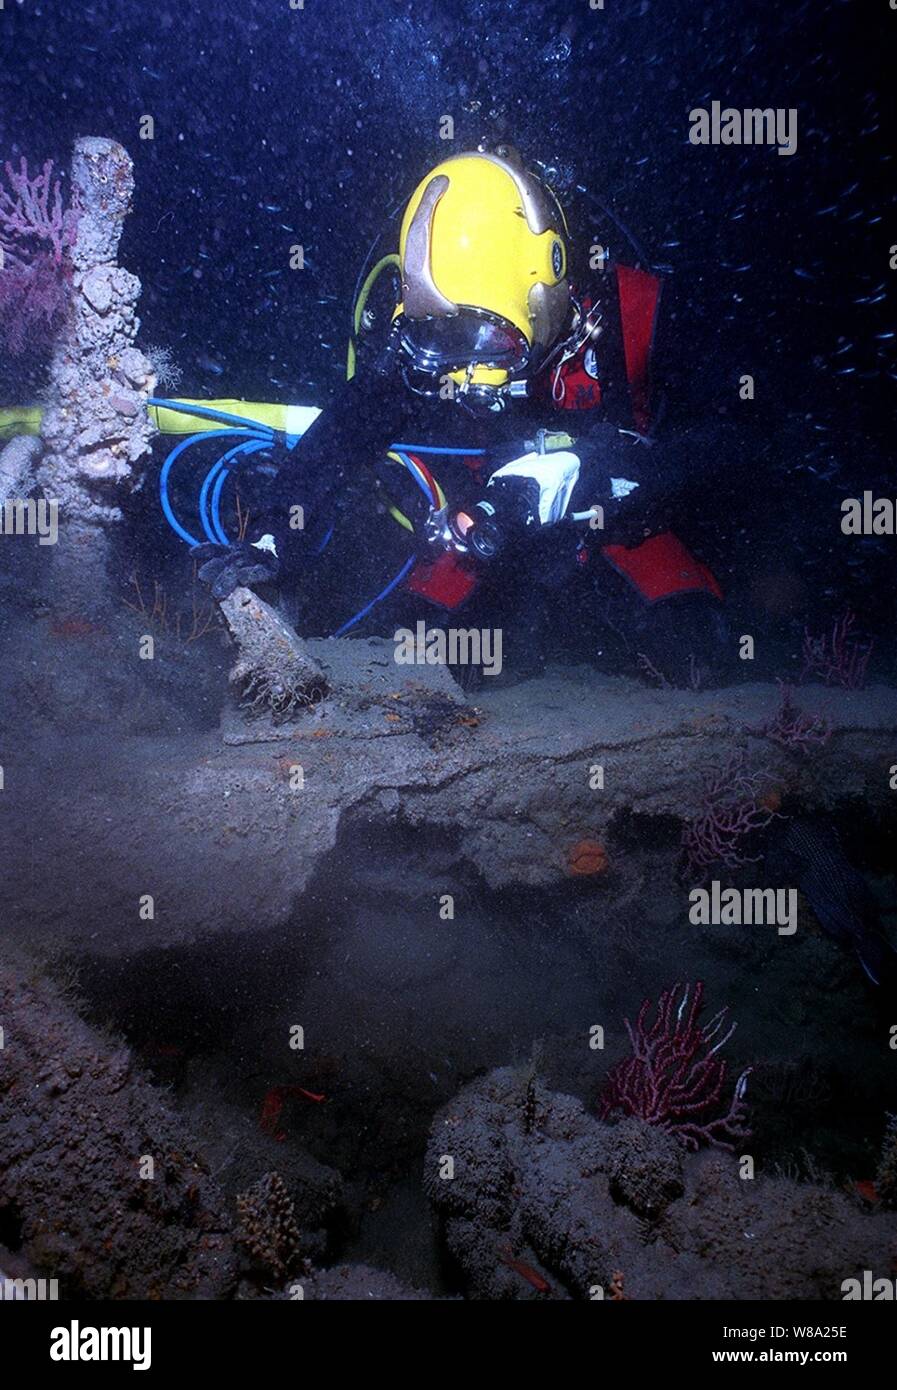 U.S. Navy Cmdr. Philip G. Beierl inspects an artifact on the sunken U.S. Civil War ship USS Monitor 240 feet below the oceanХs surface on June 23, 1999.  Beierl is diving from the USS Grasp (ARS 51) in waters sixteen miles off Cape Hatteras, N.C.  The battle between the USS Monitor and the CSS Virginia, formerly the USS Merrimack, on March 9, 1862, at Hampton Roads, Va., was the first battle fought by iron armored vessels during the civil war.  Beierl is the commanding officer of Mobile Diving and Salvage Unit Two. Stock Photo